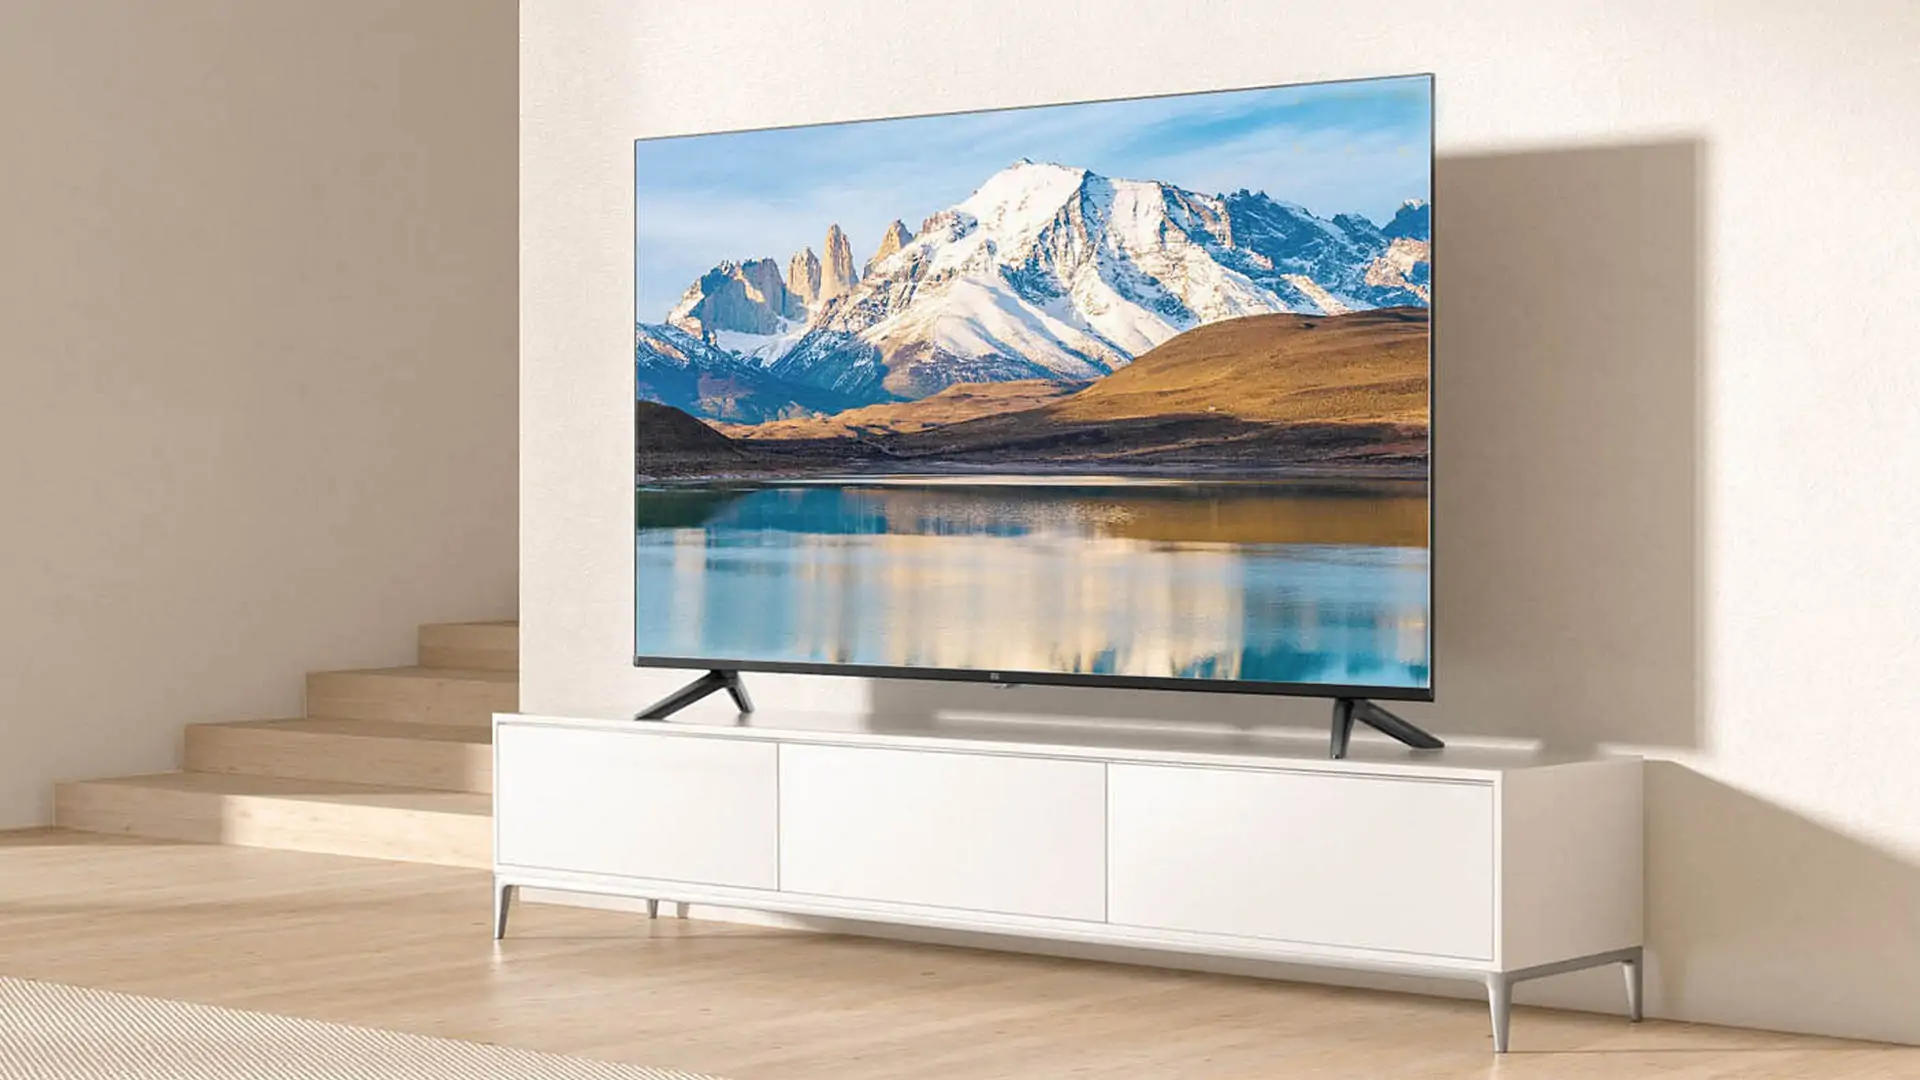 Xiaomi introduced a series of 4K TVs TV EA Pro starting at $325